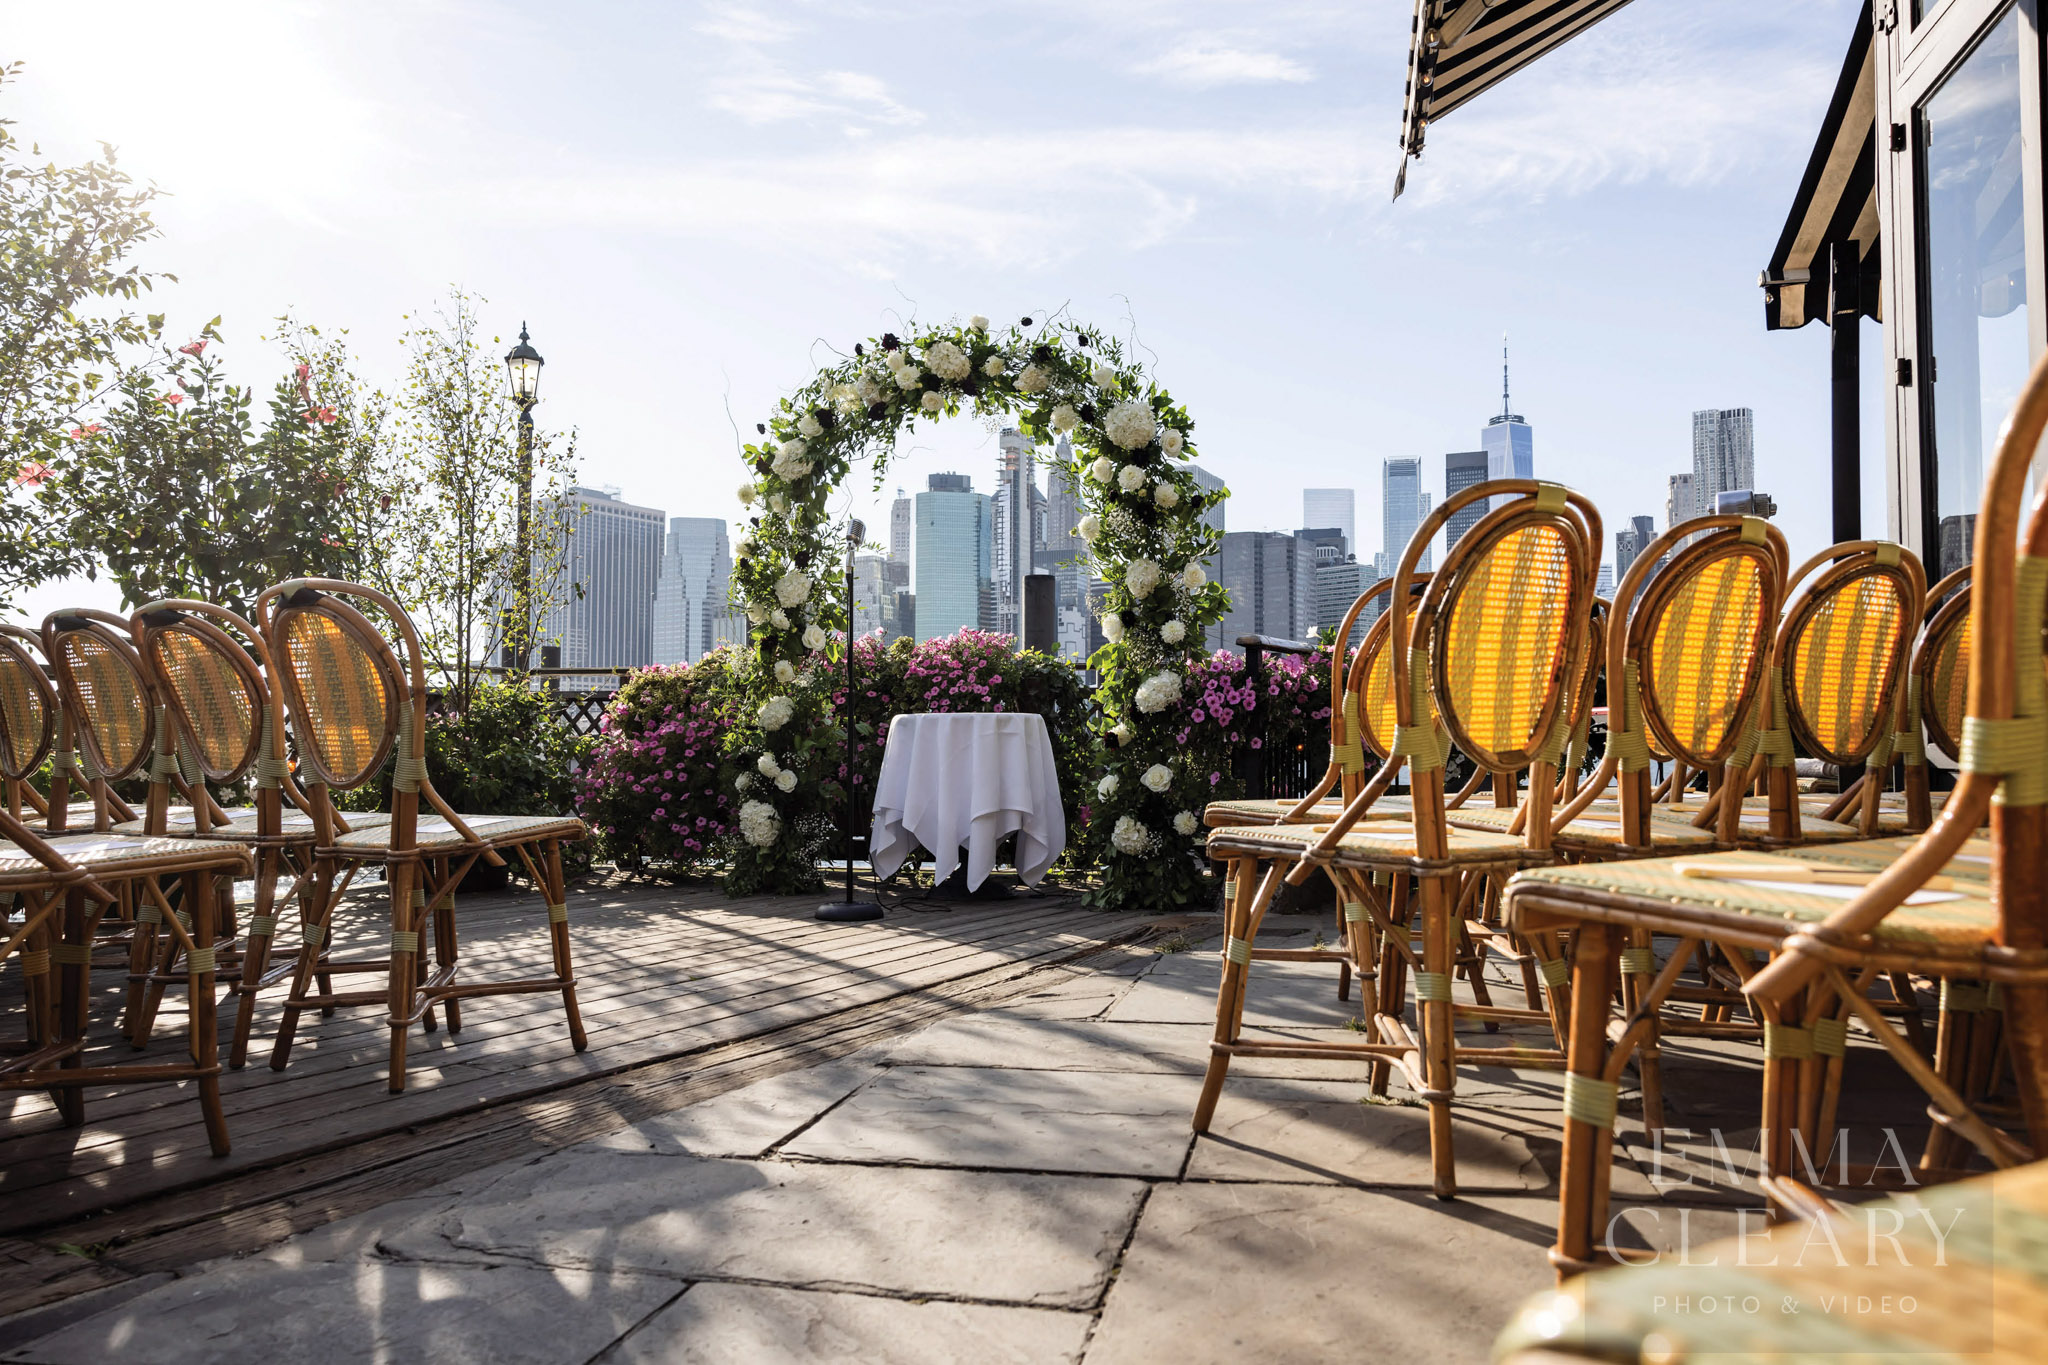 The River Cafe Wedding